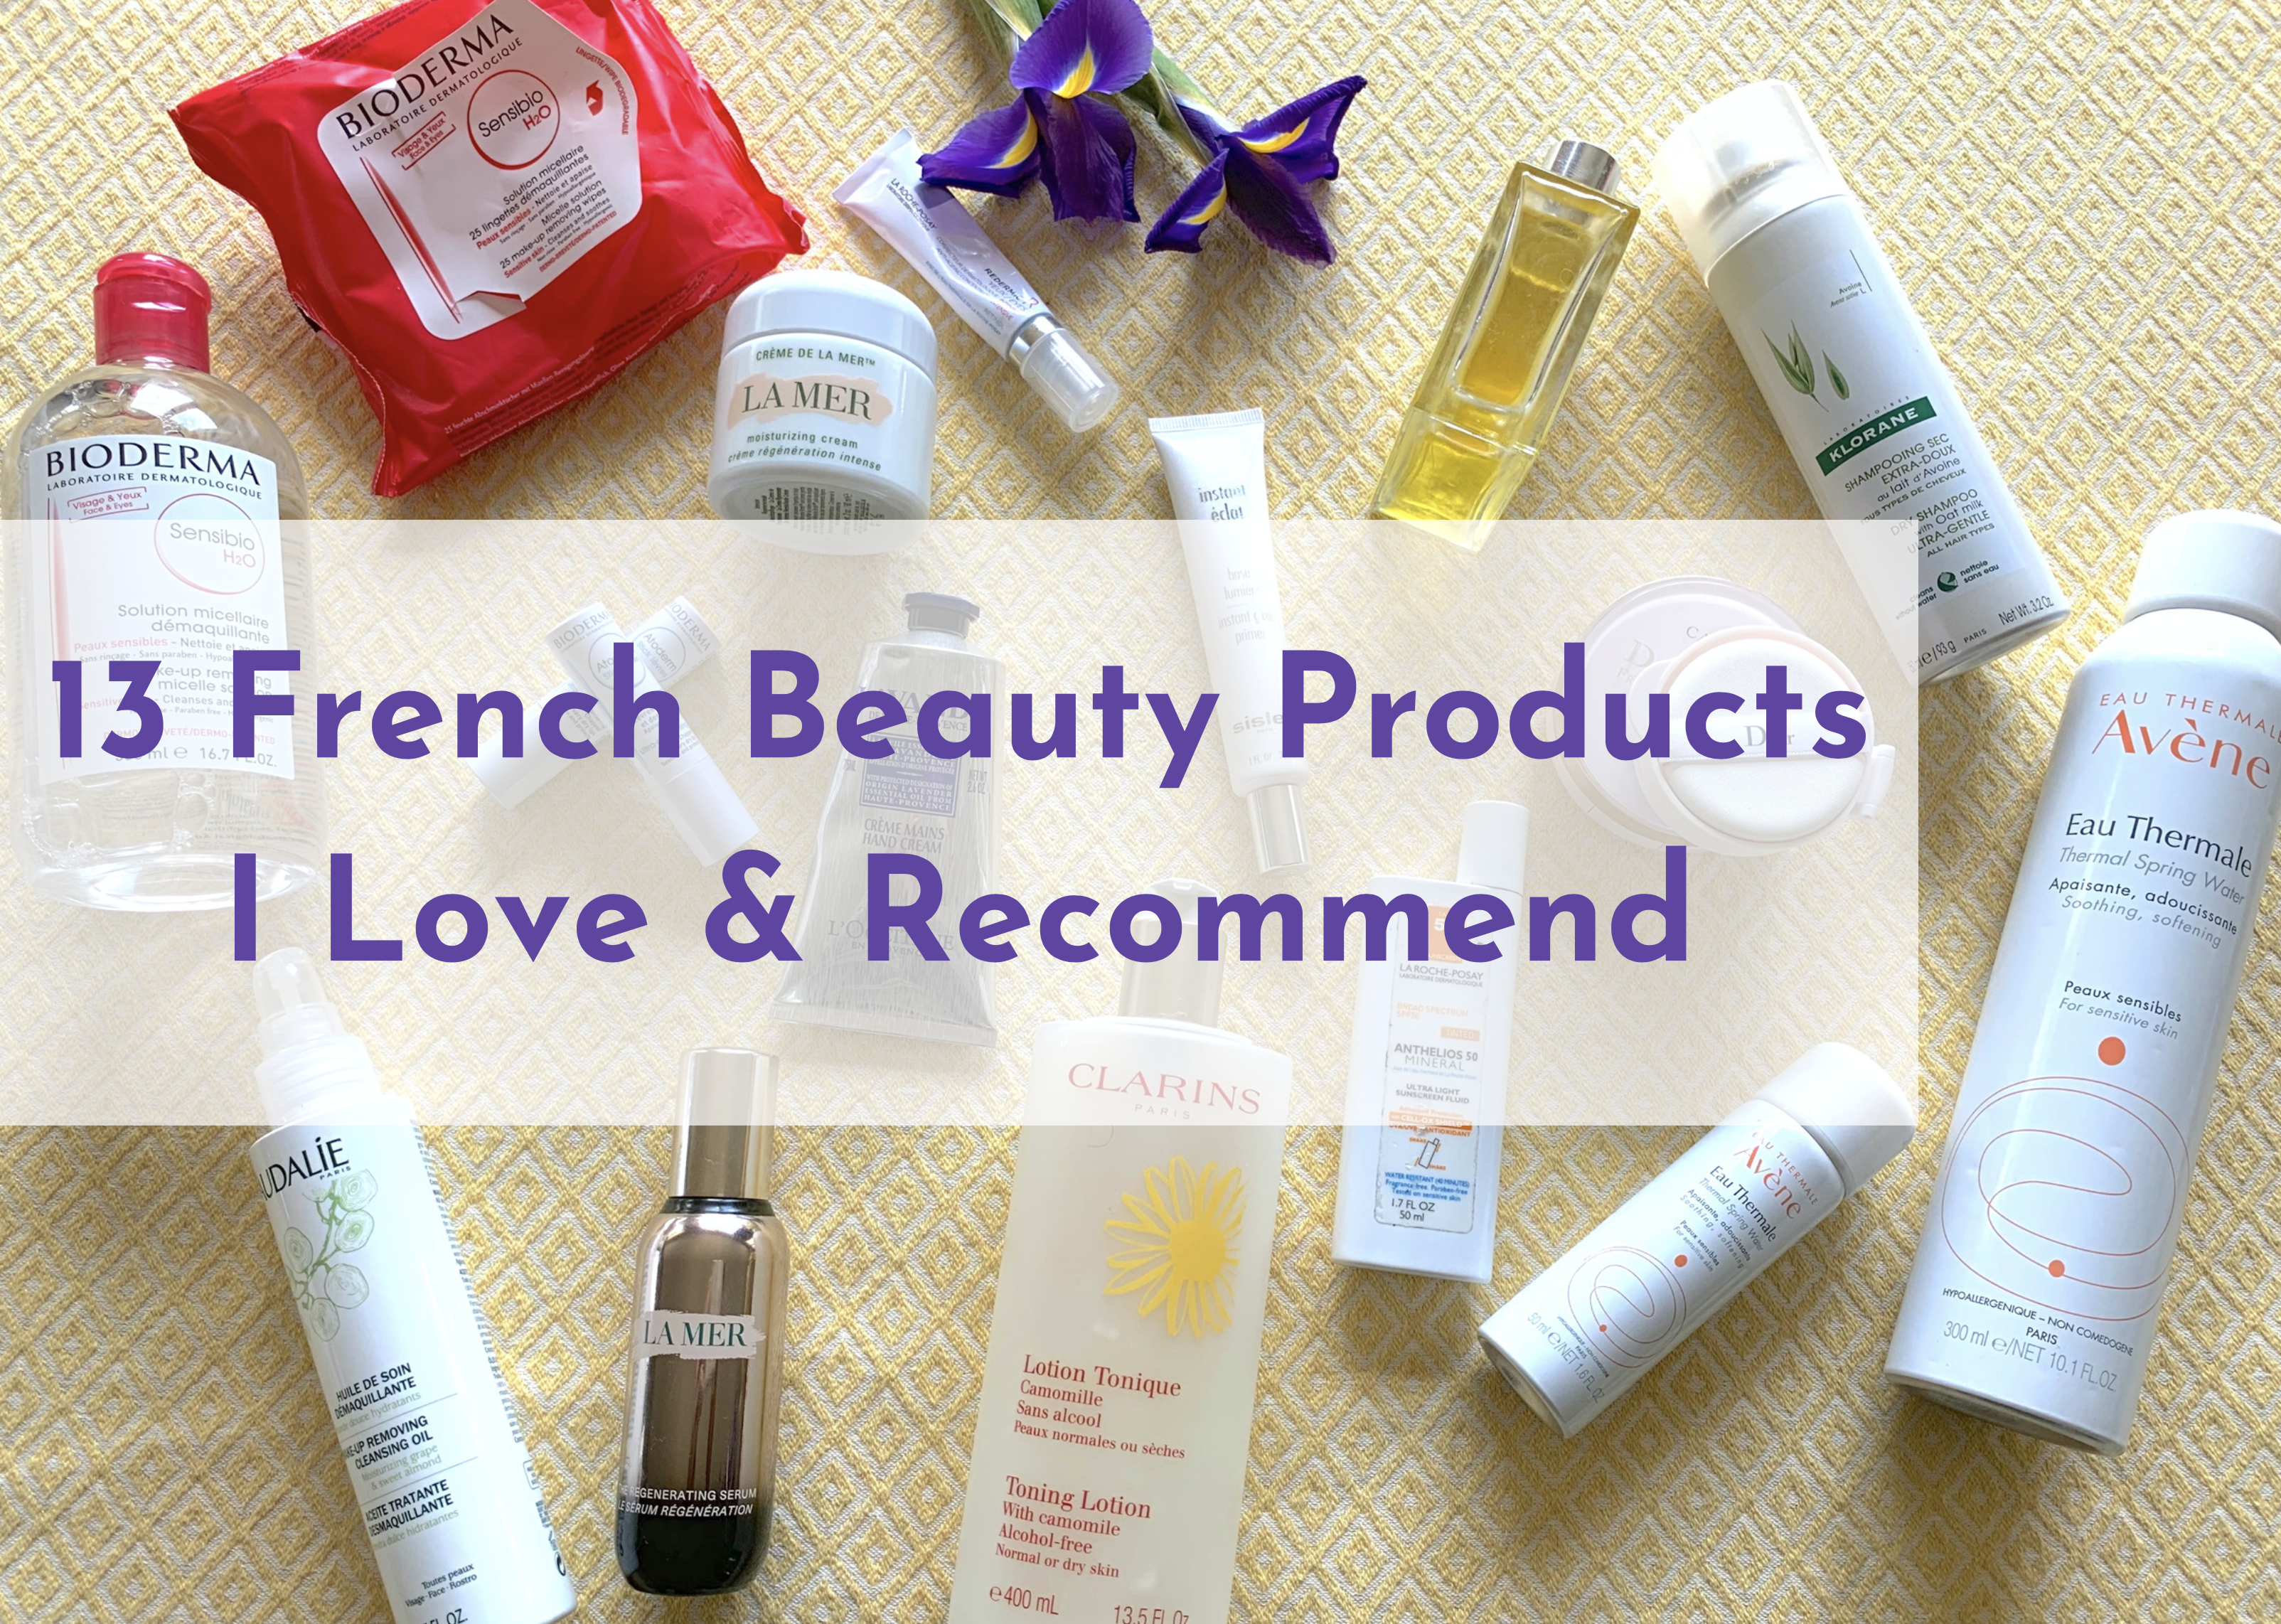 13 French Beauty Products I Love & Recommend